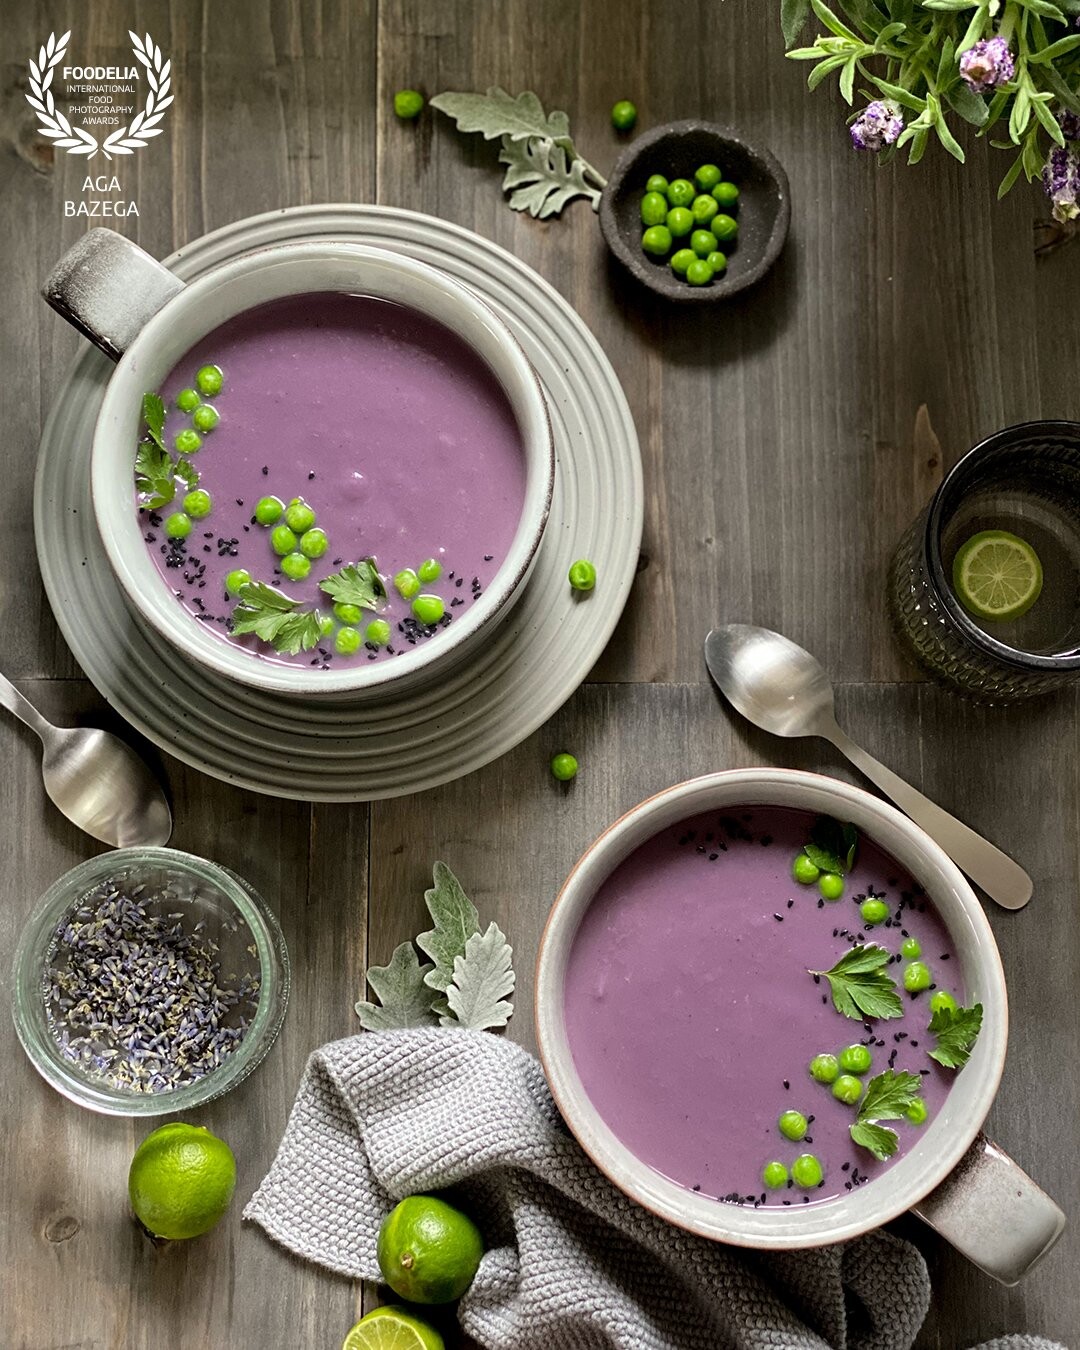 Creme du Barry, purple cauliflower soup is a French Classic that tastes just as good as it looks. Image created for photography challenge.